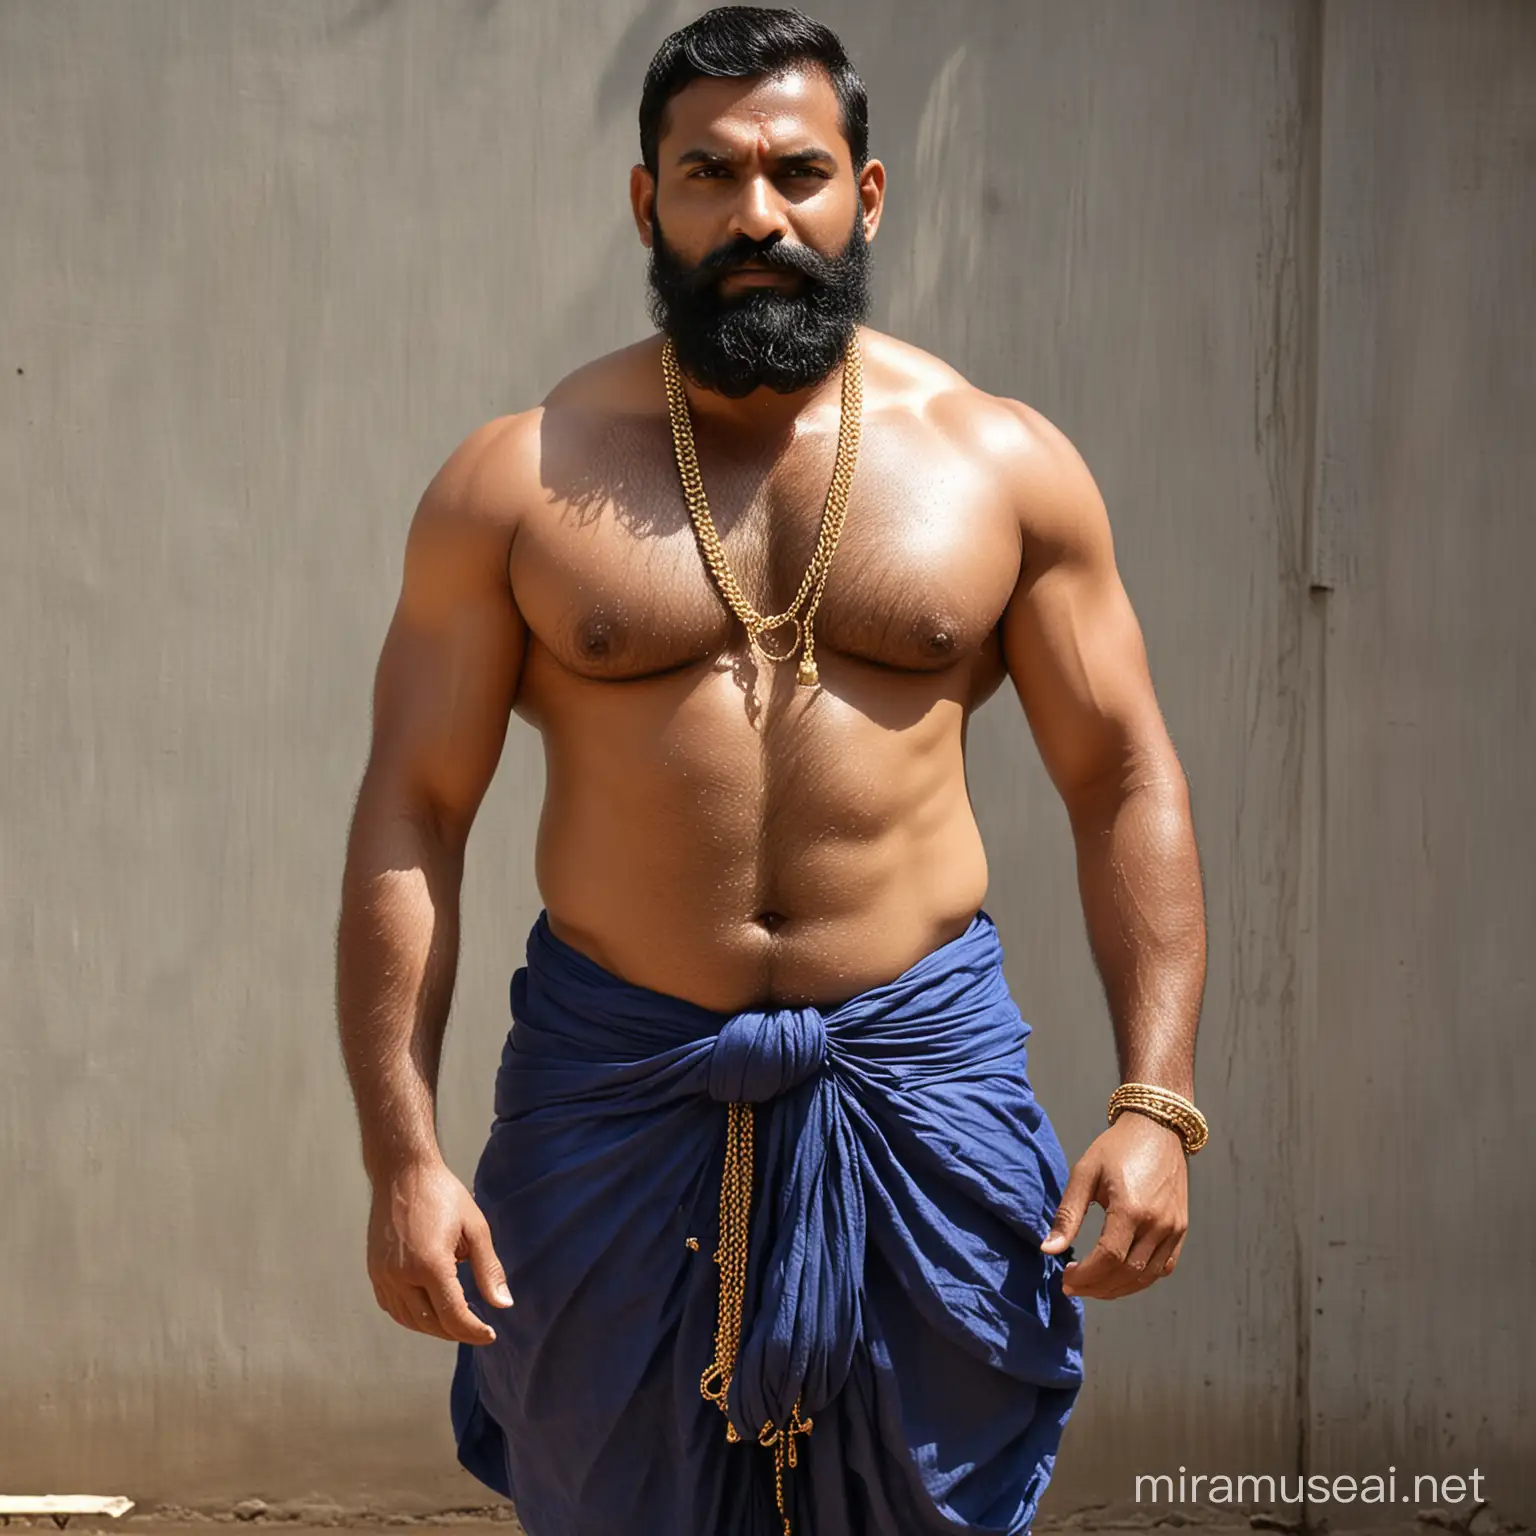 Summer afternoon,Indian Handsome mature muscular beefy daddies with big fat pot belly and stunning feature, Wearing a blue dhoti, heavy gold chains, heavily oiled up body, entire body is drenched in sweat and glistening under the hot sun. His body is hairy and has a hairy chest and full beard. The sight is truly mesmerizing as he looks stunning like asexy god